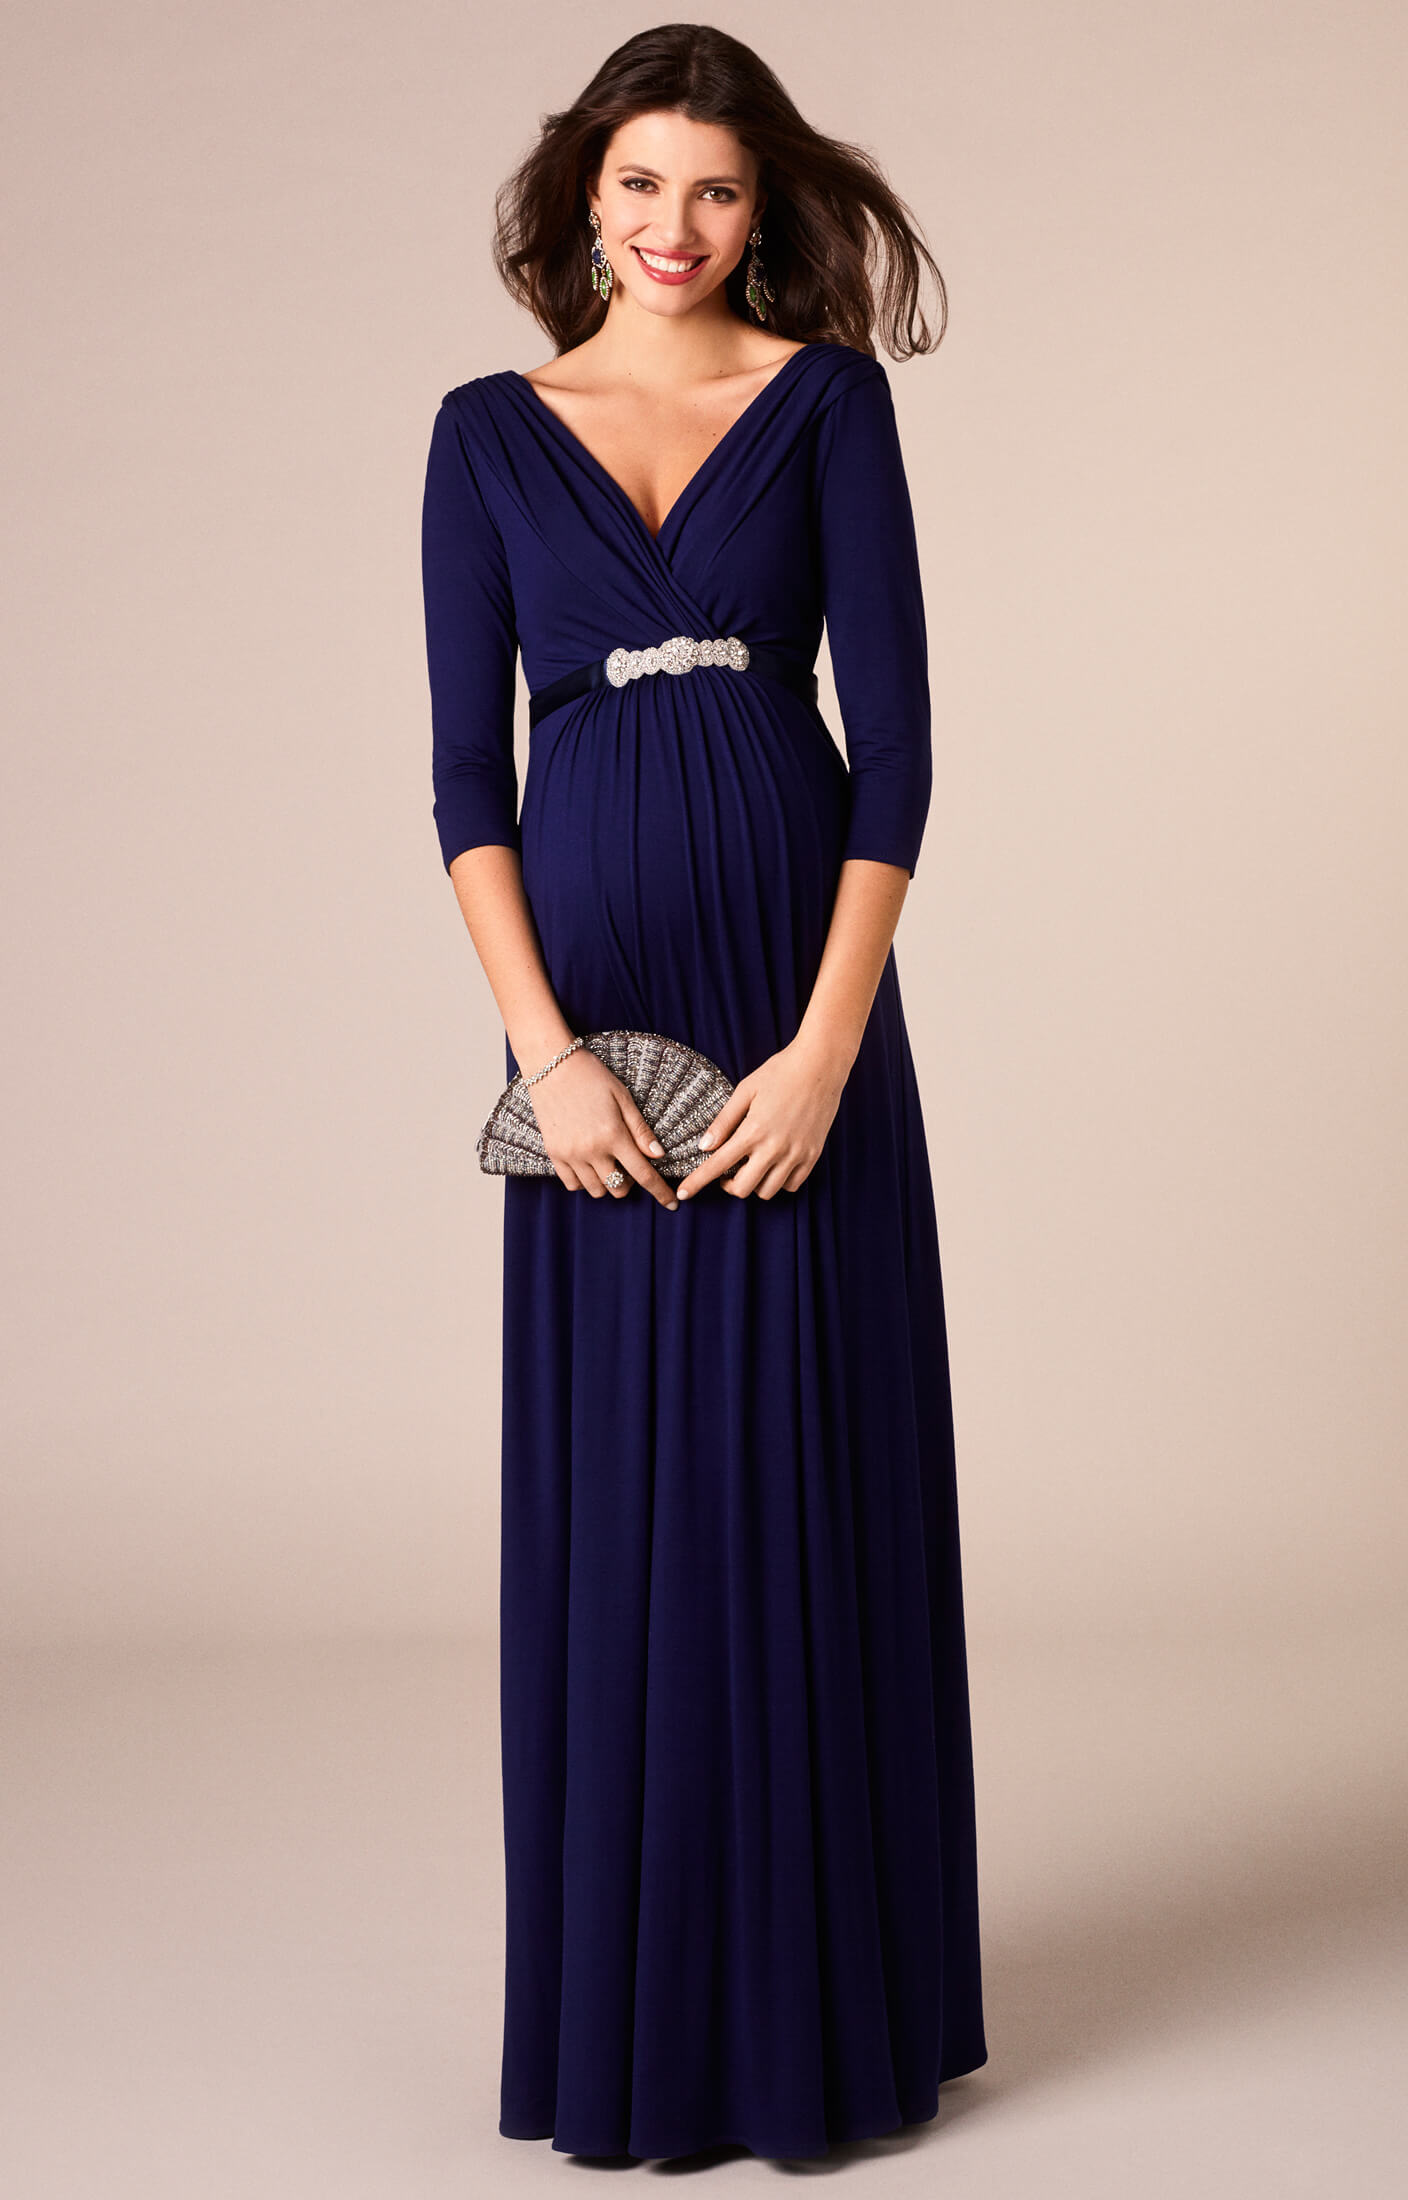 Willow Maternity Gown Long Eclipse Blue - Maternity Wedding Dresses ...